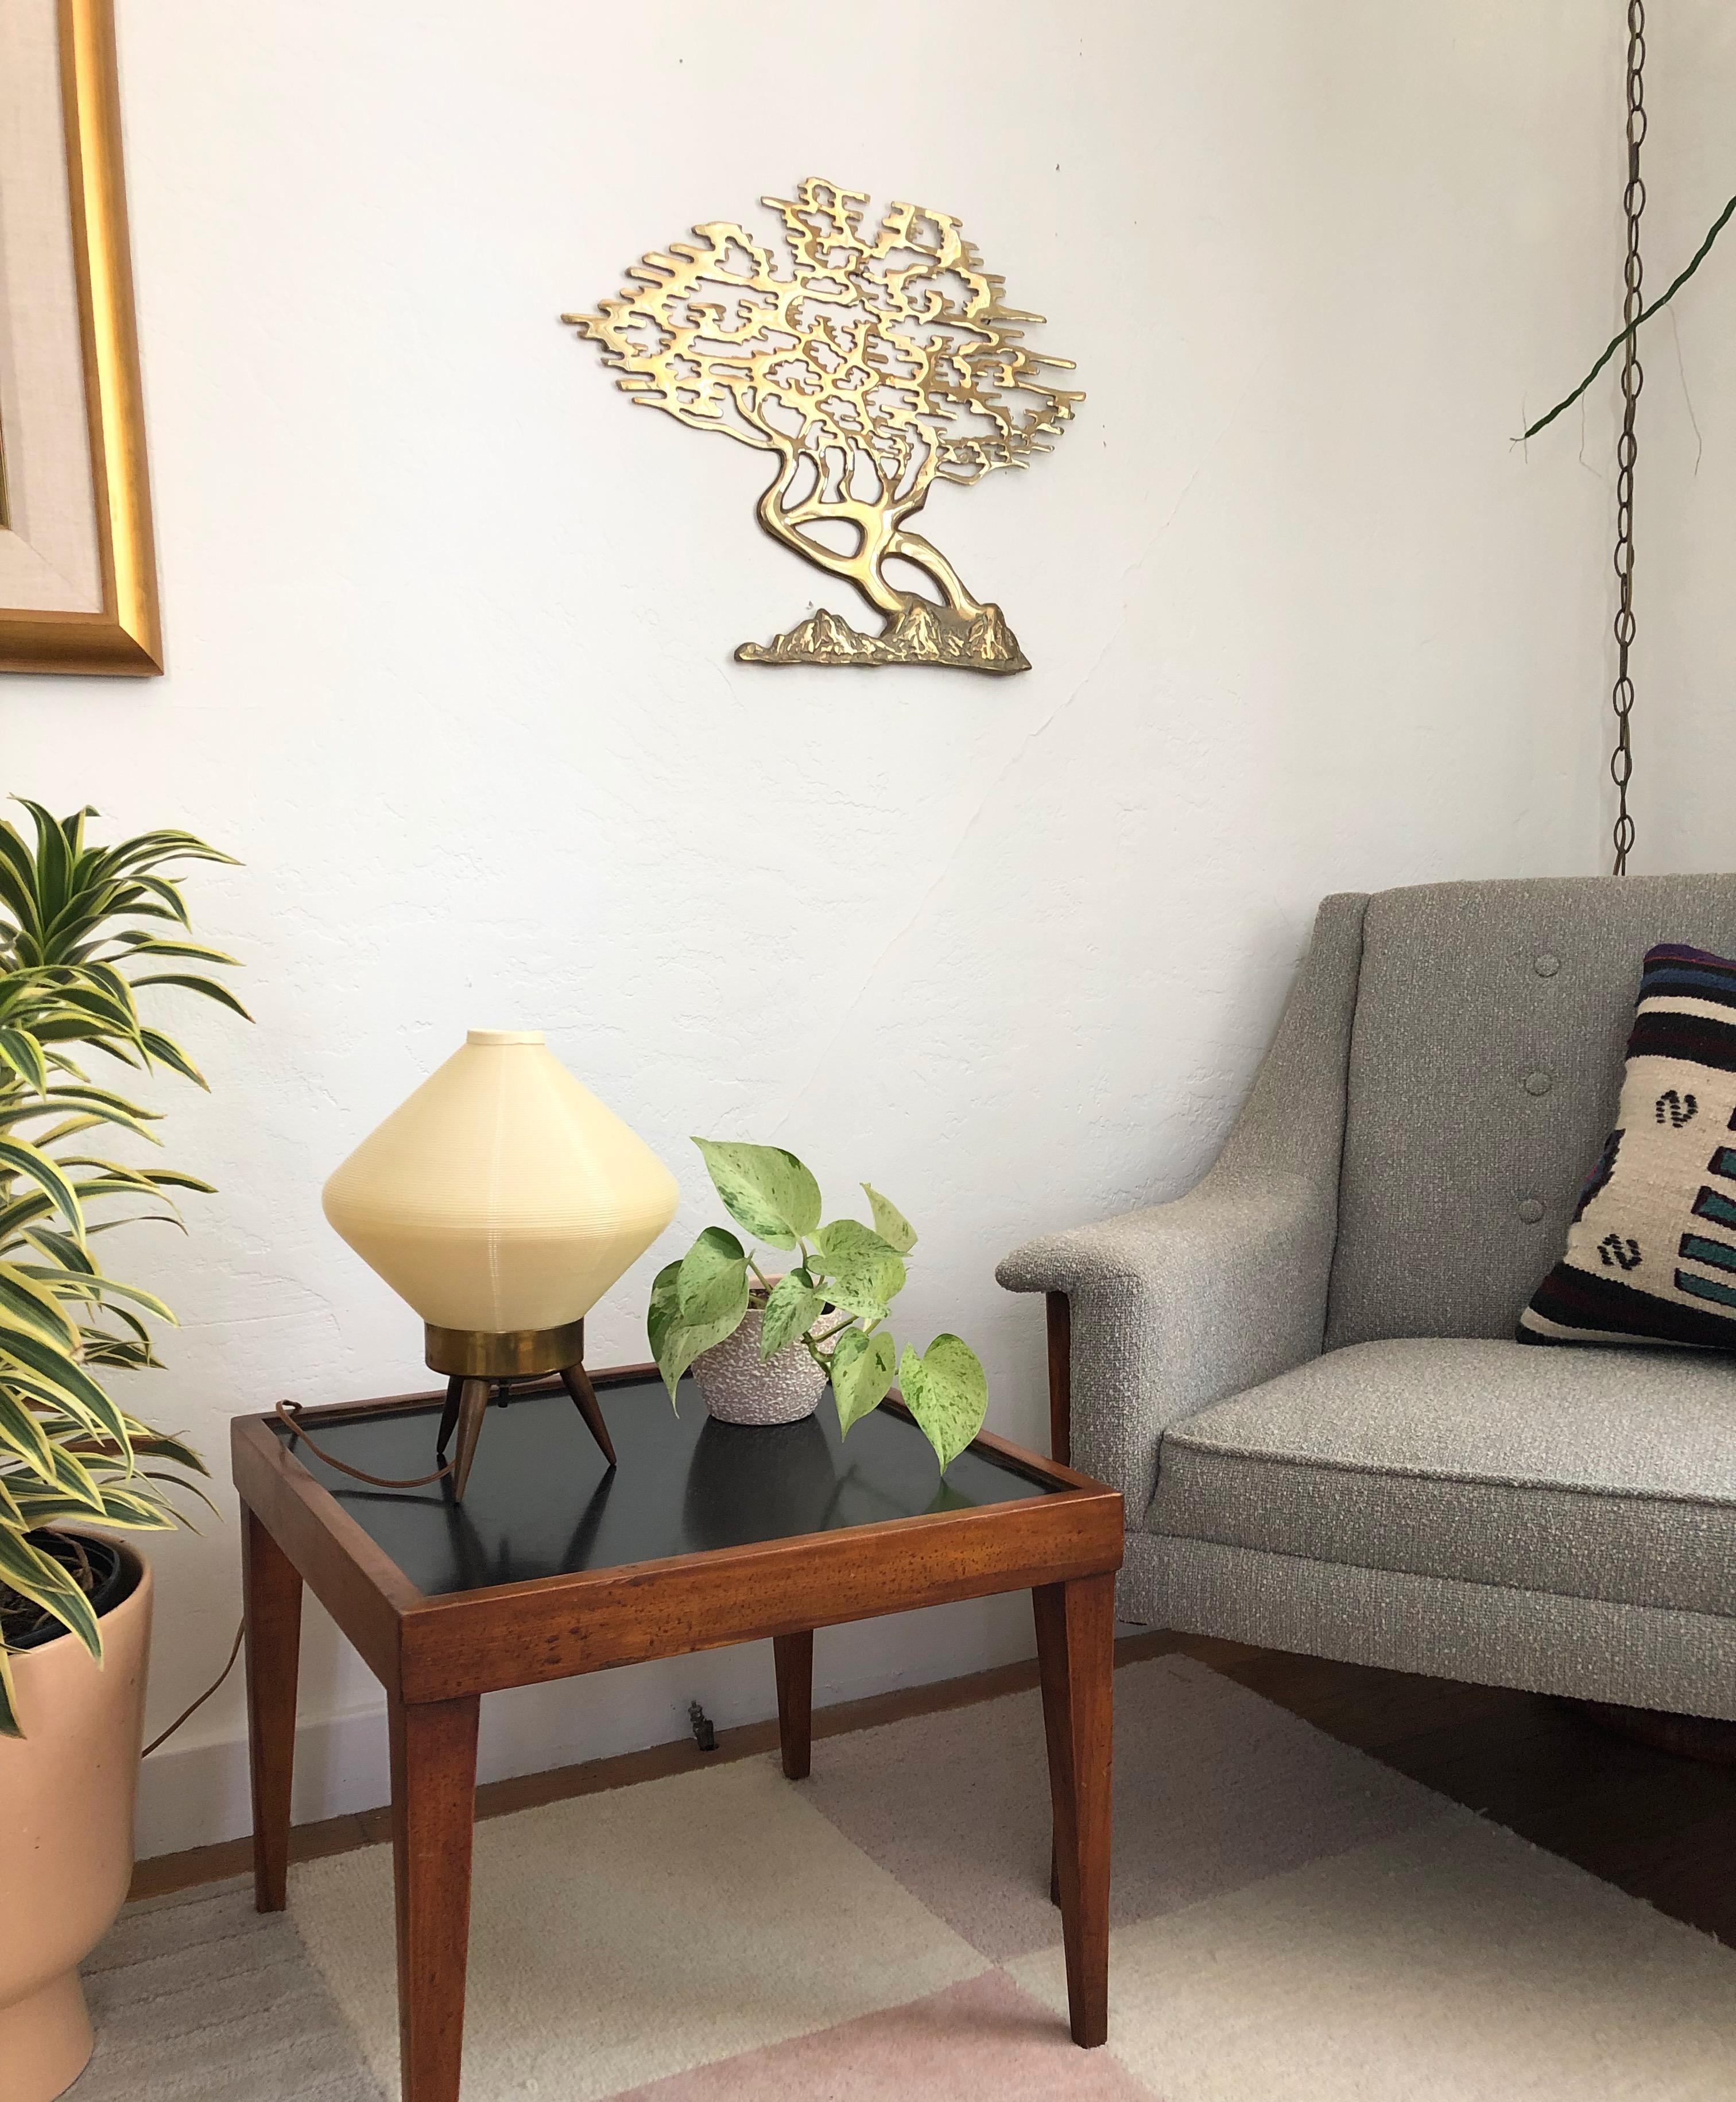 A beautiful vintage brass wall sculpture of a tree. Beautiful stylized detailing of the leaves.
 